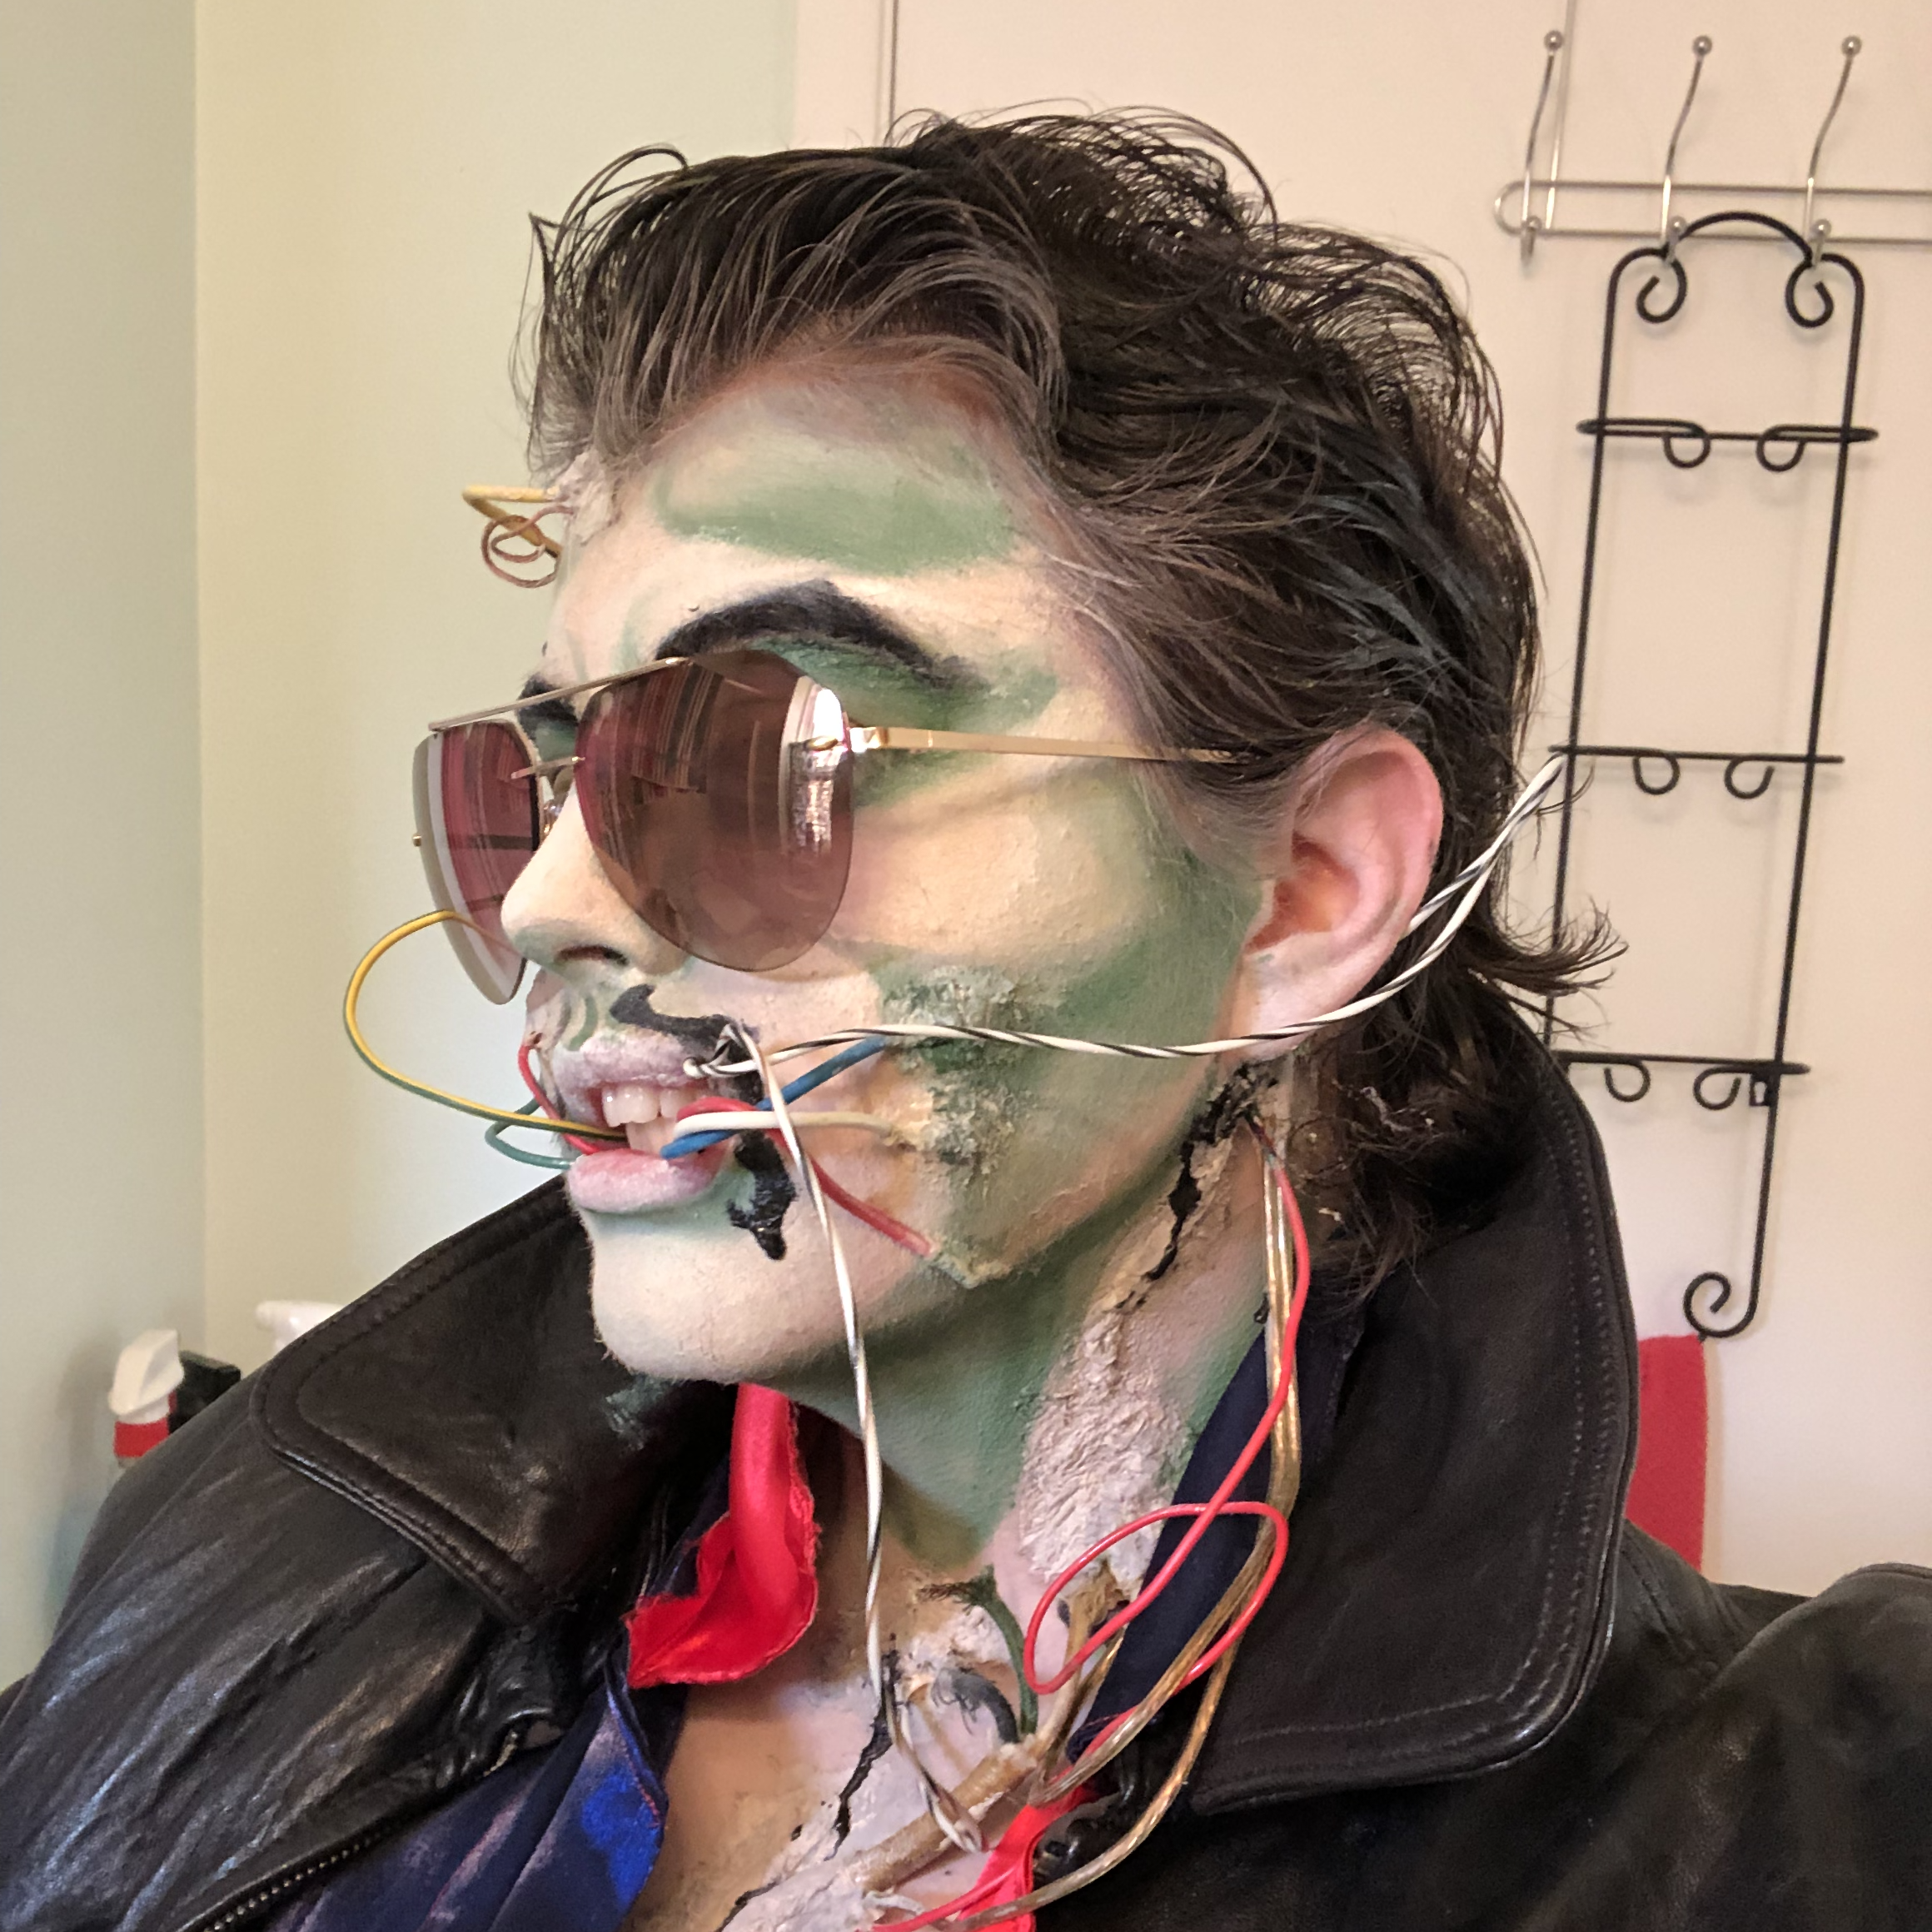 A headshot of a person with wires coming out of their skin and mouth, wearing sunglasses and a leather jacket. Link takes you to project page.